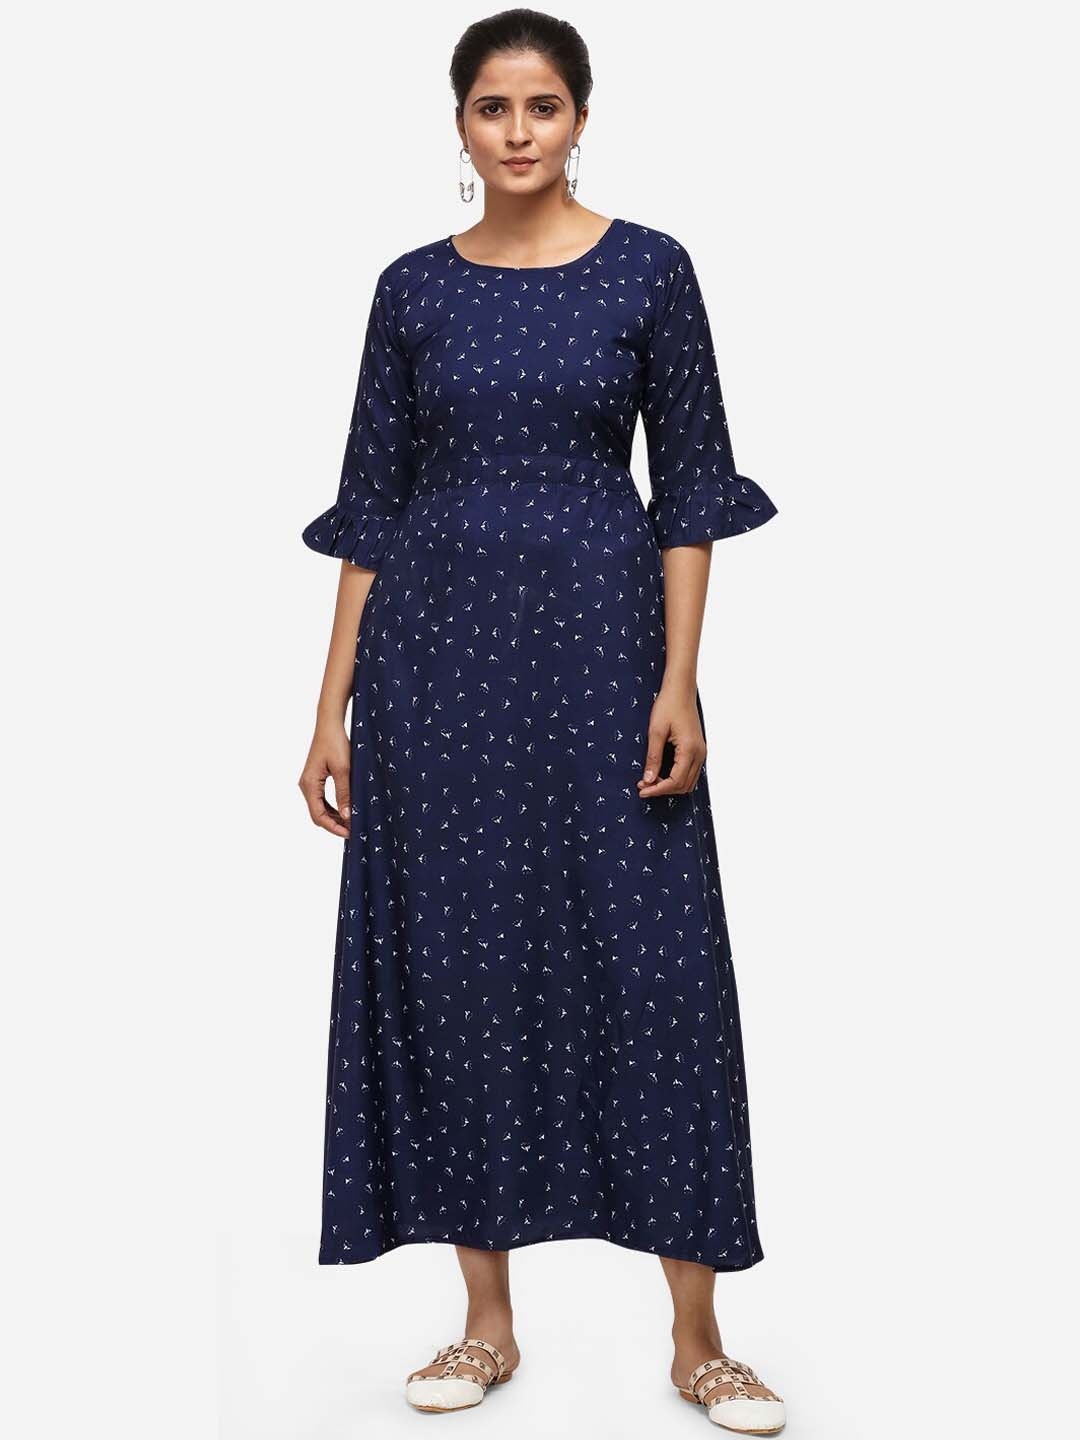 Buy Silk Bazar Women Navy Blue And White Printed Maxi Dress Dresses For Women 12360302 Myntra 7456